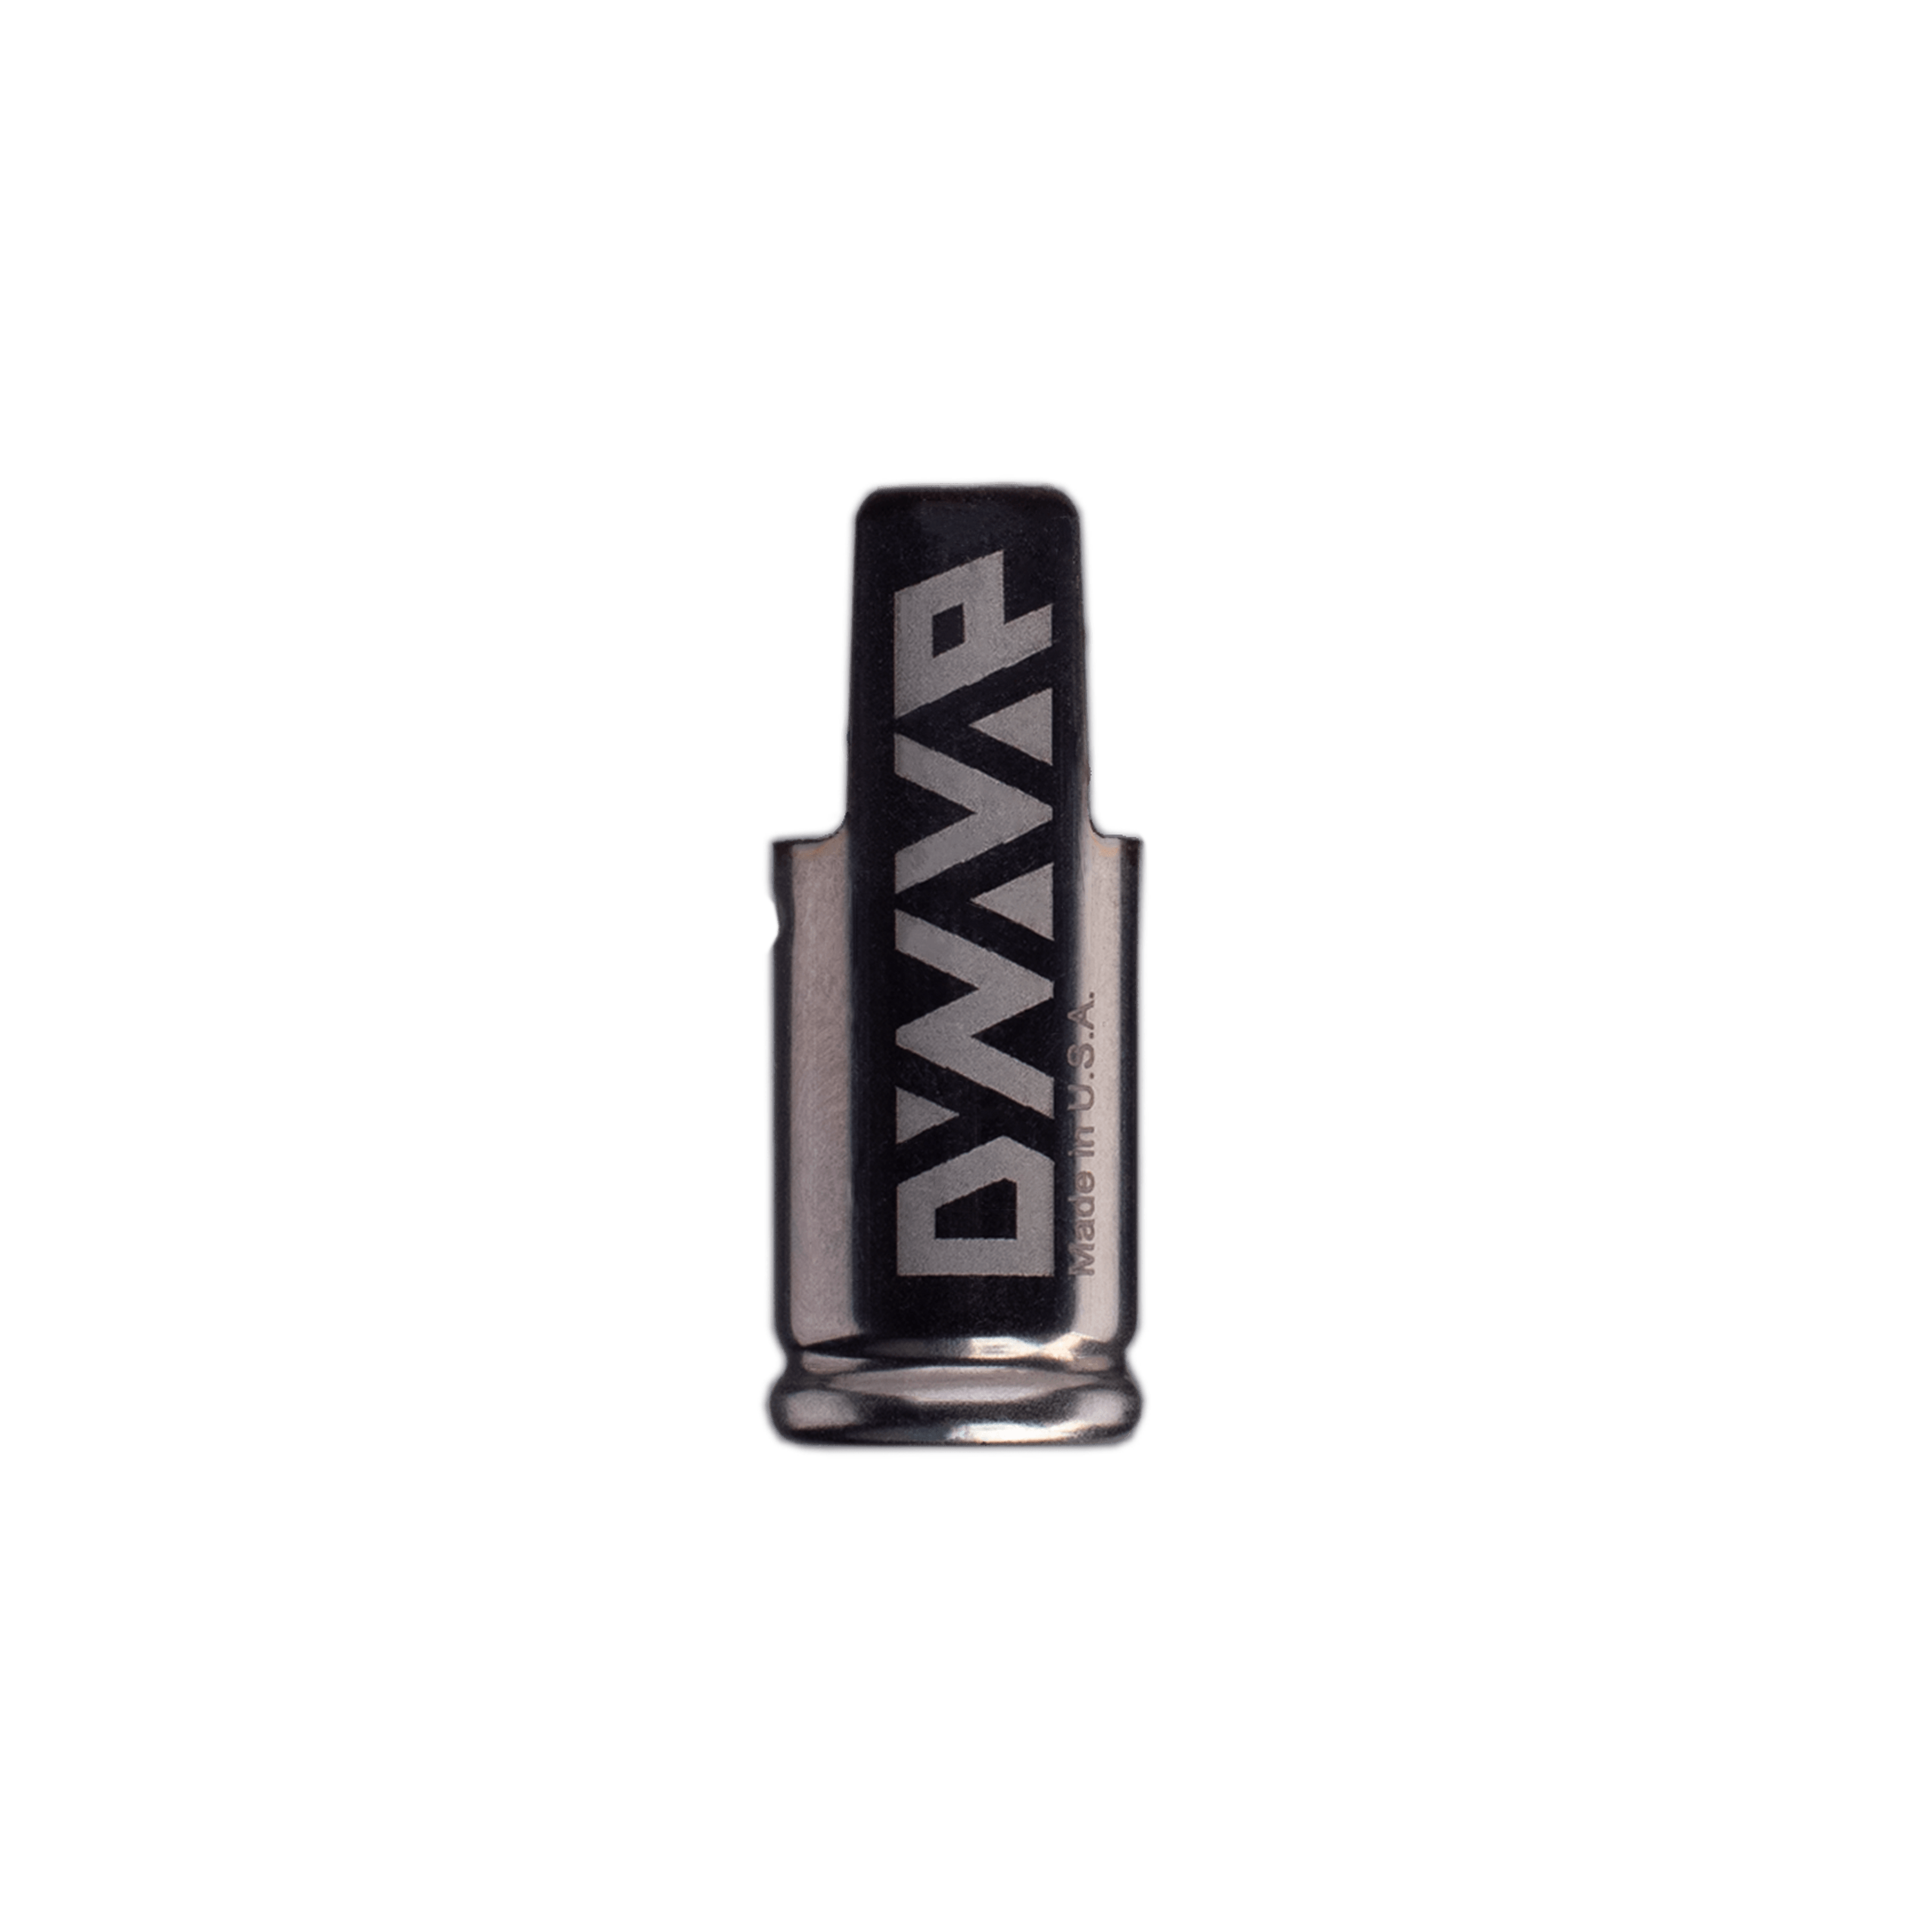 captive cap for dynavap vaporizers with indents front view